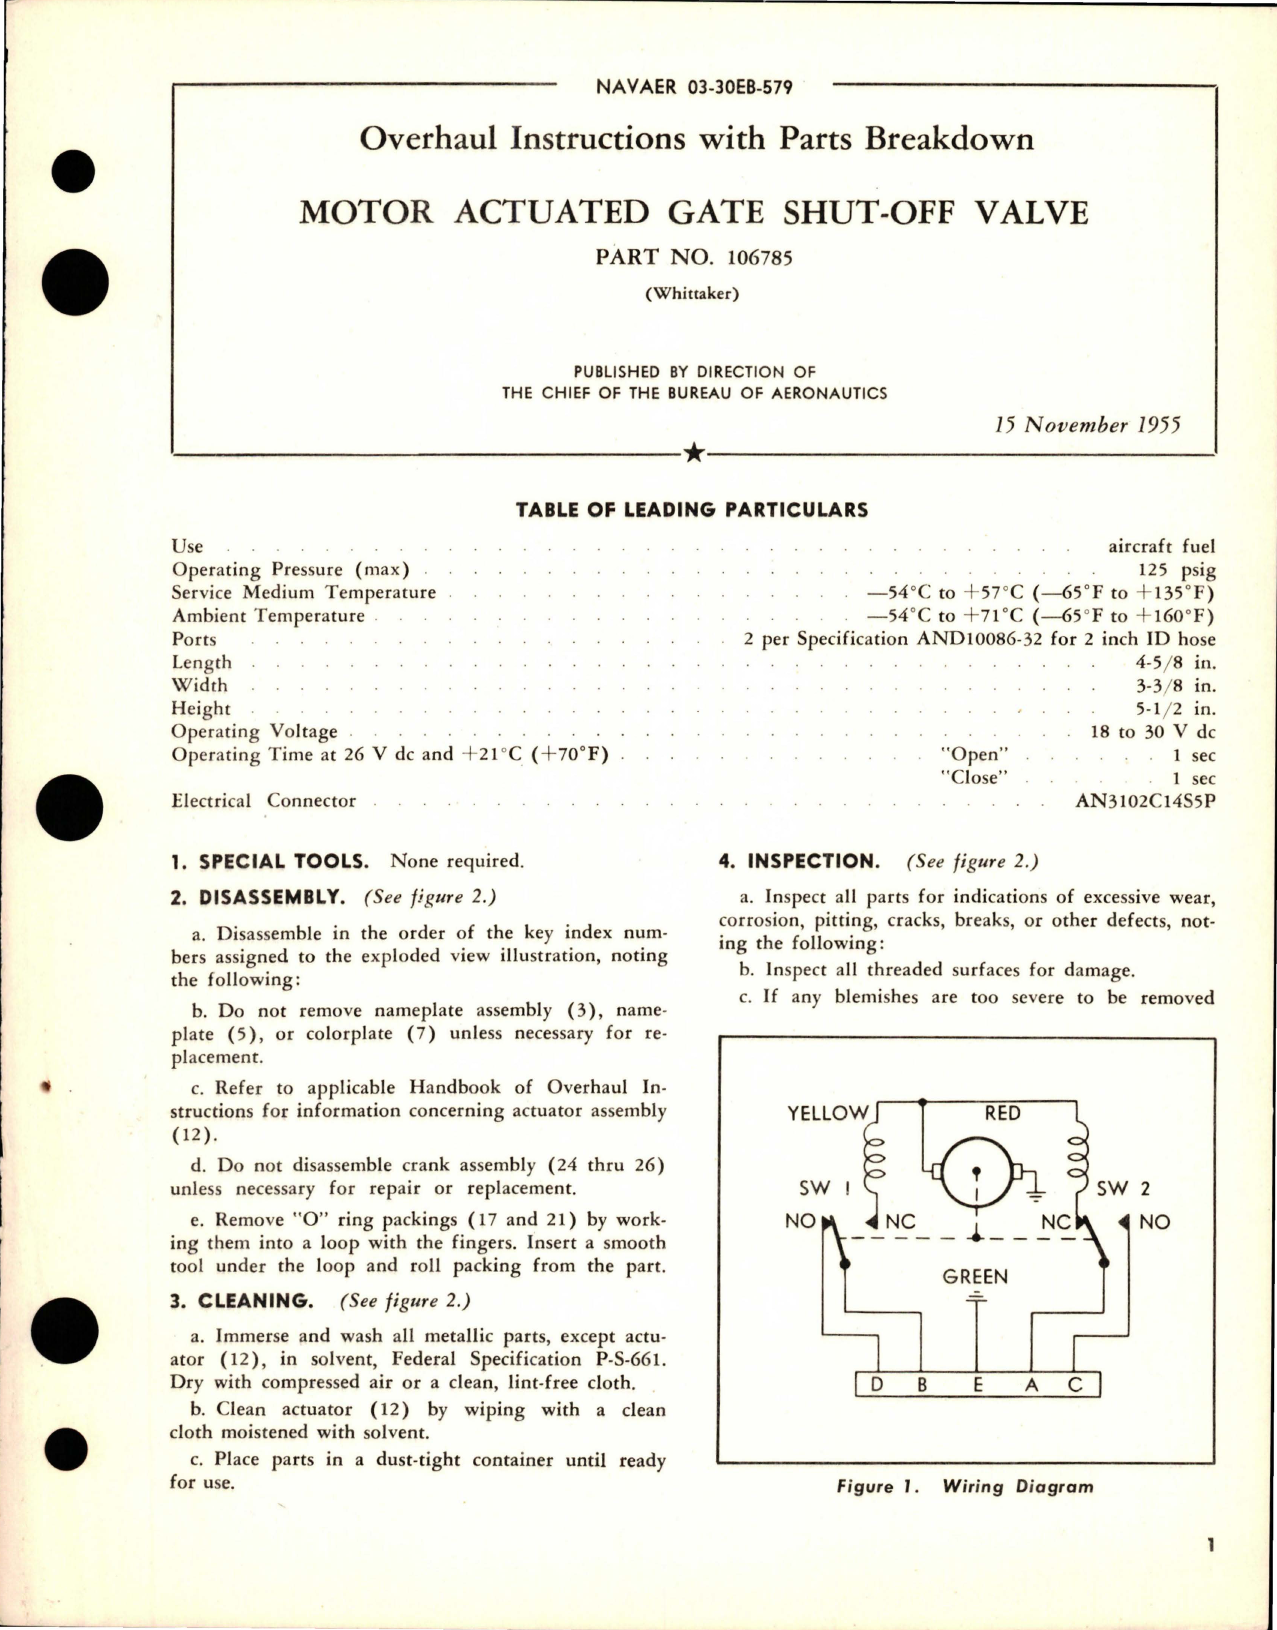 Sample page 1 from AirCorps Library document: Overhaul Instructions with Parts for Motor Actuated Gate Shut Off Valve - Part 106785